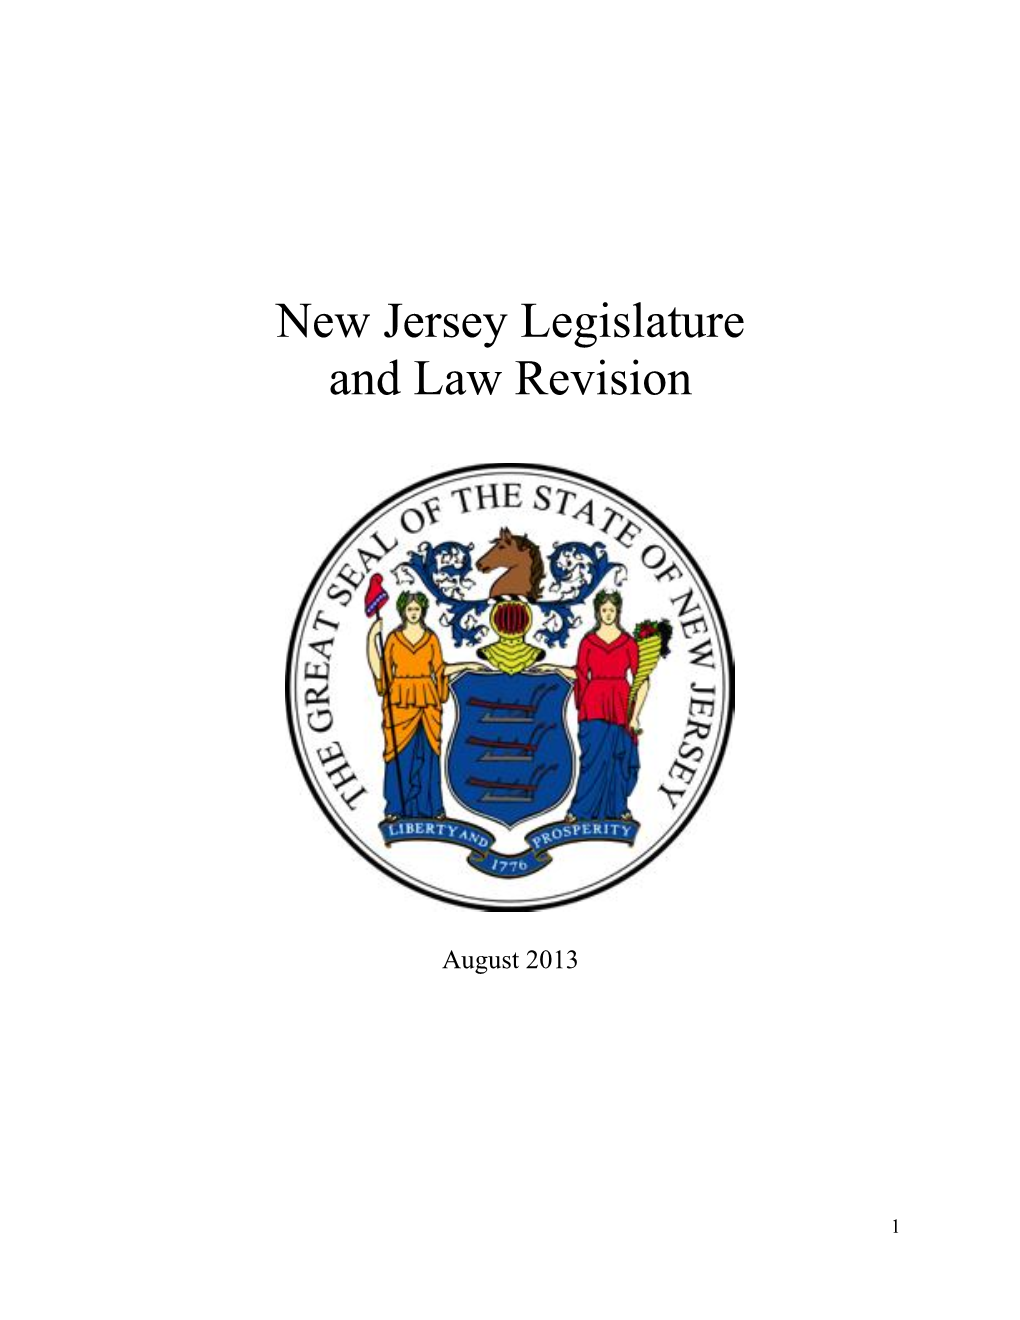 New Jersey Legislature and Law Revision